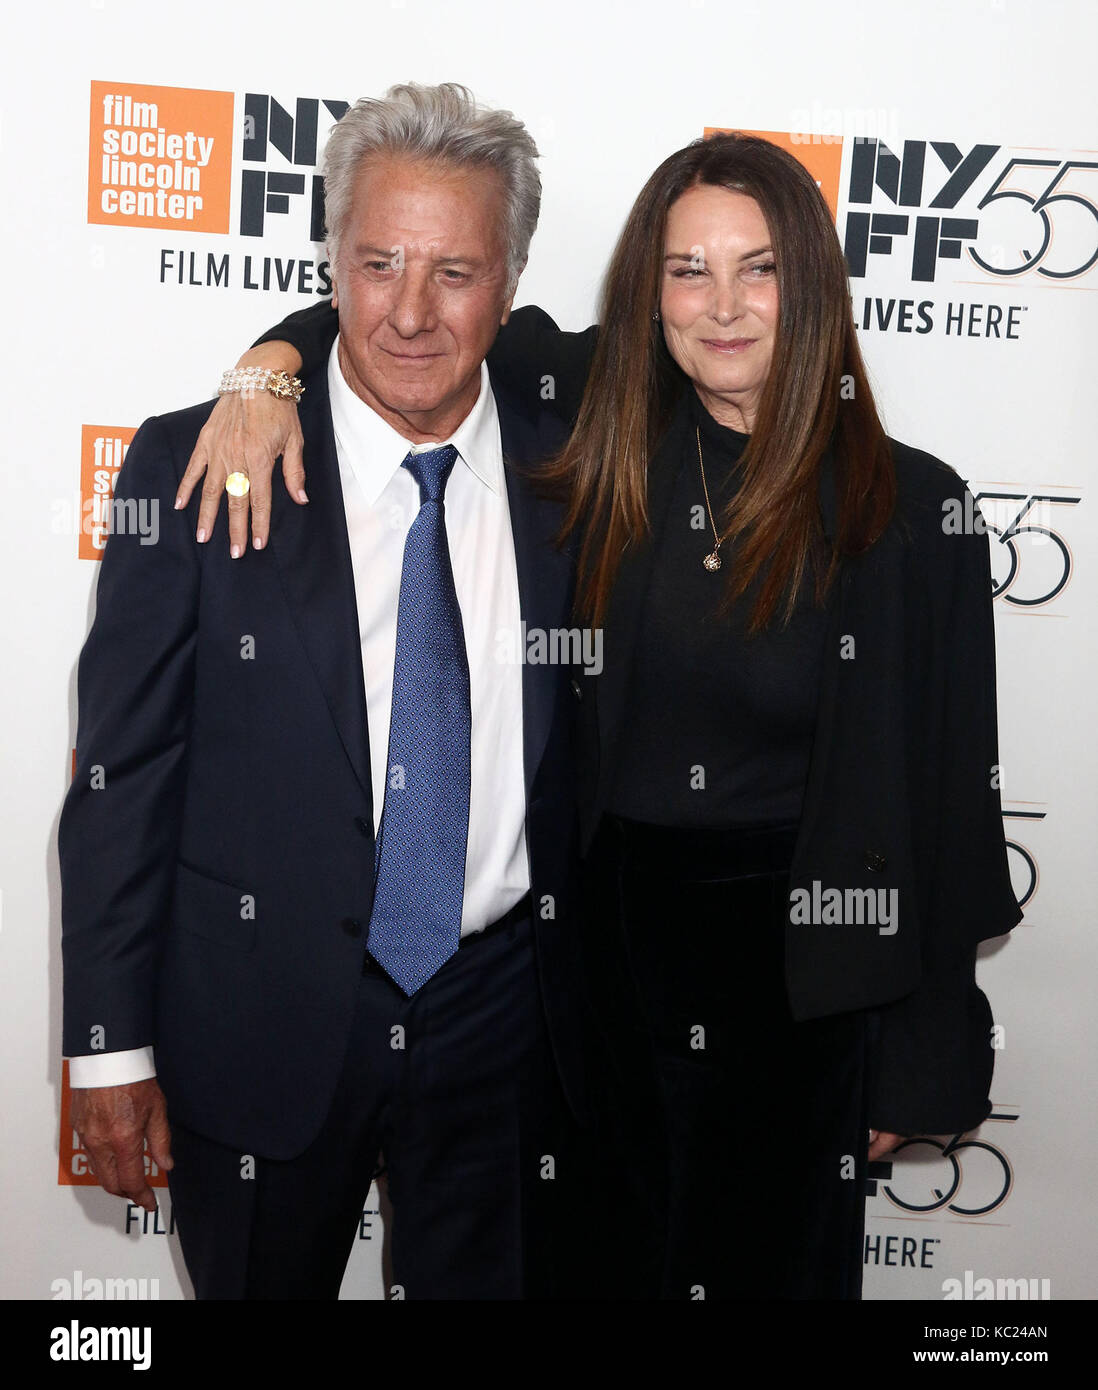 New York, New York, USA. 1st Oct, 2017. Actor DUSTIN HOFFMAN and his wife LISA HOFFMAN attend the 55th New York Film Festival premiere of 'The Meyerowitz Stories' held Alice Tully Hall held at Lincoln Center. Credit: Nancy Kaszerman/ZUMA Wire/Alamy Live News Stock Photo